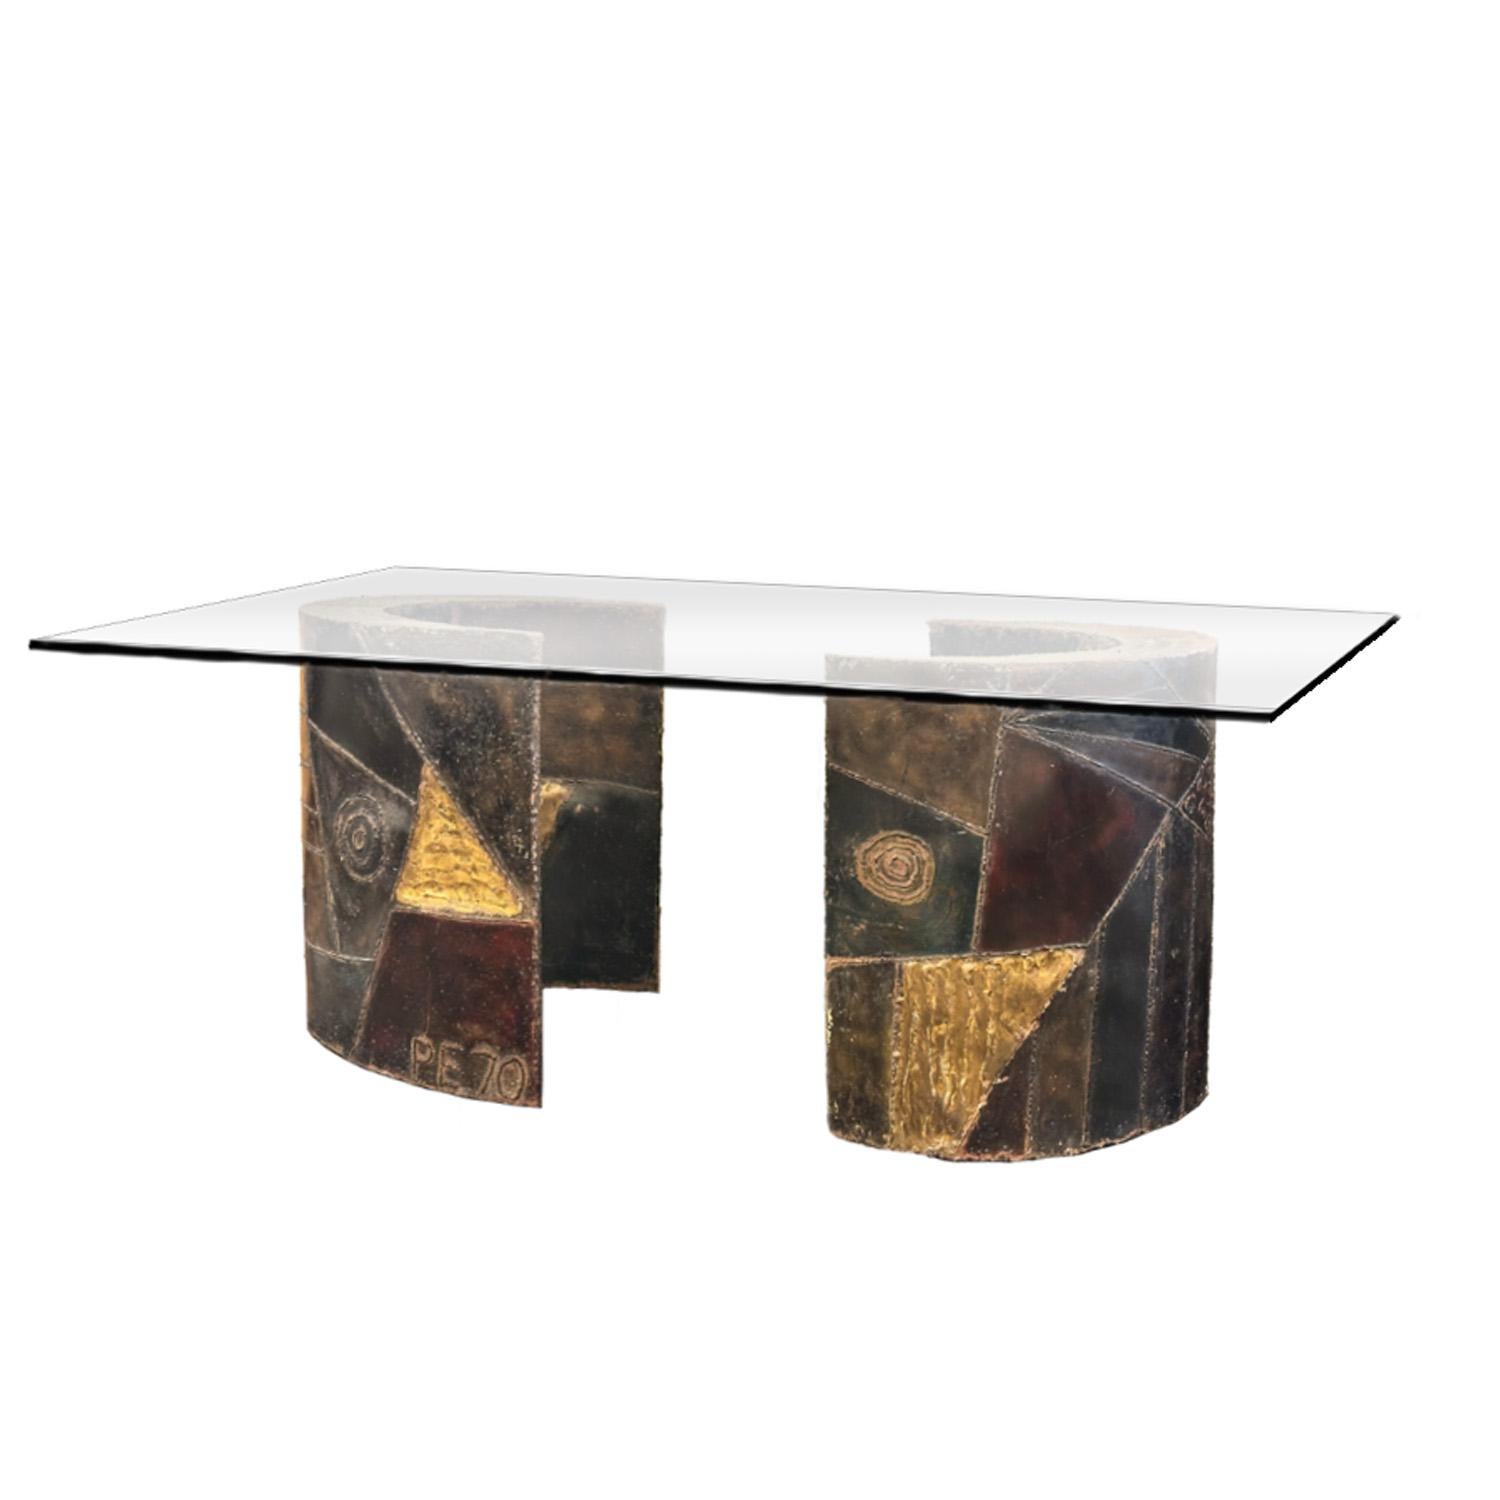 Pair of brutalist welded steel crescent shaped table bases decorated with colored enamel paint and gilt accents by Paul Evans for Directional Furniture. Bases support a thick glass table top and one is signed PE70  on the botton outside. American,